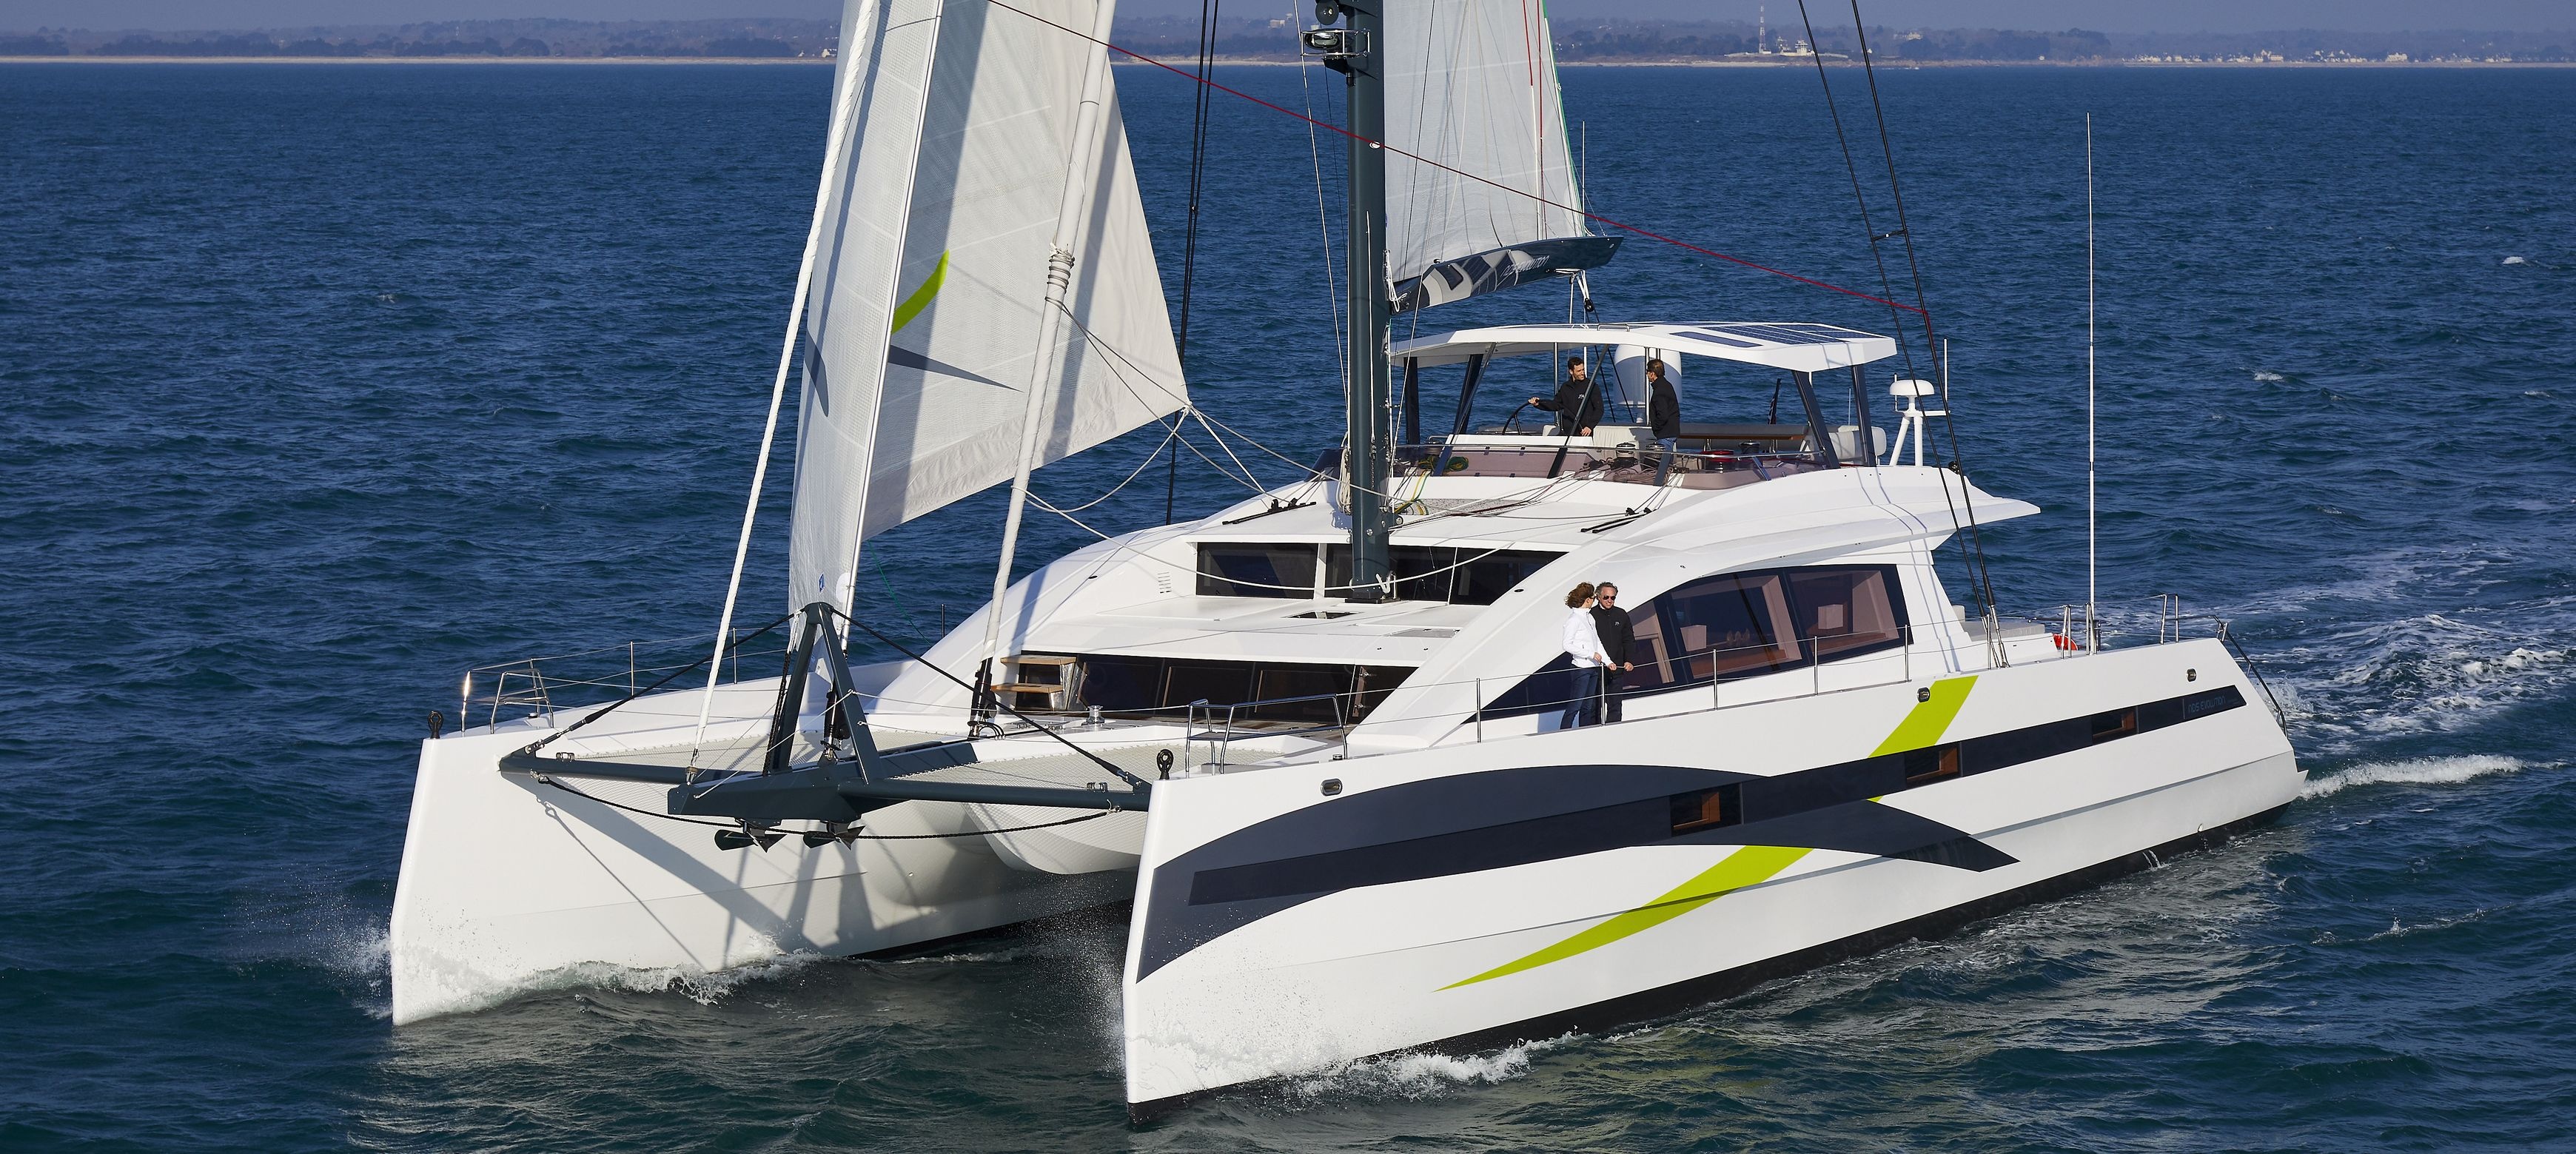 Catamaran: Long Island 85, Aluminum hulls and a superstructure made of composite and assembled by gluing. 3480x1560 Dual Screen Wallpaper.